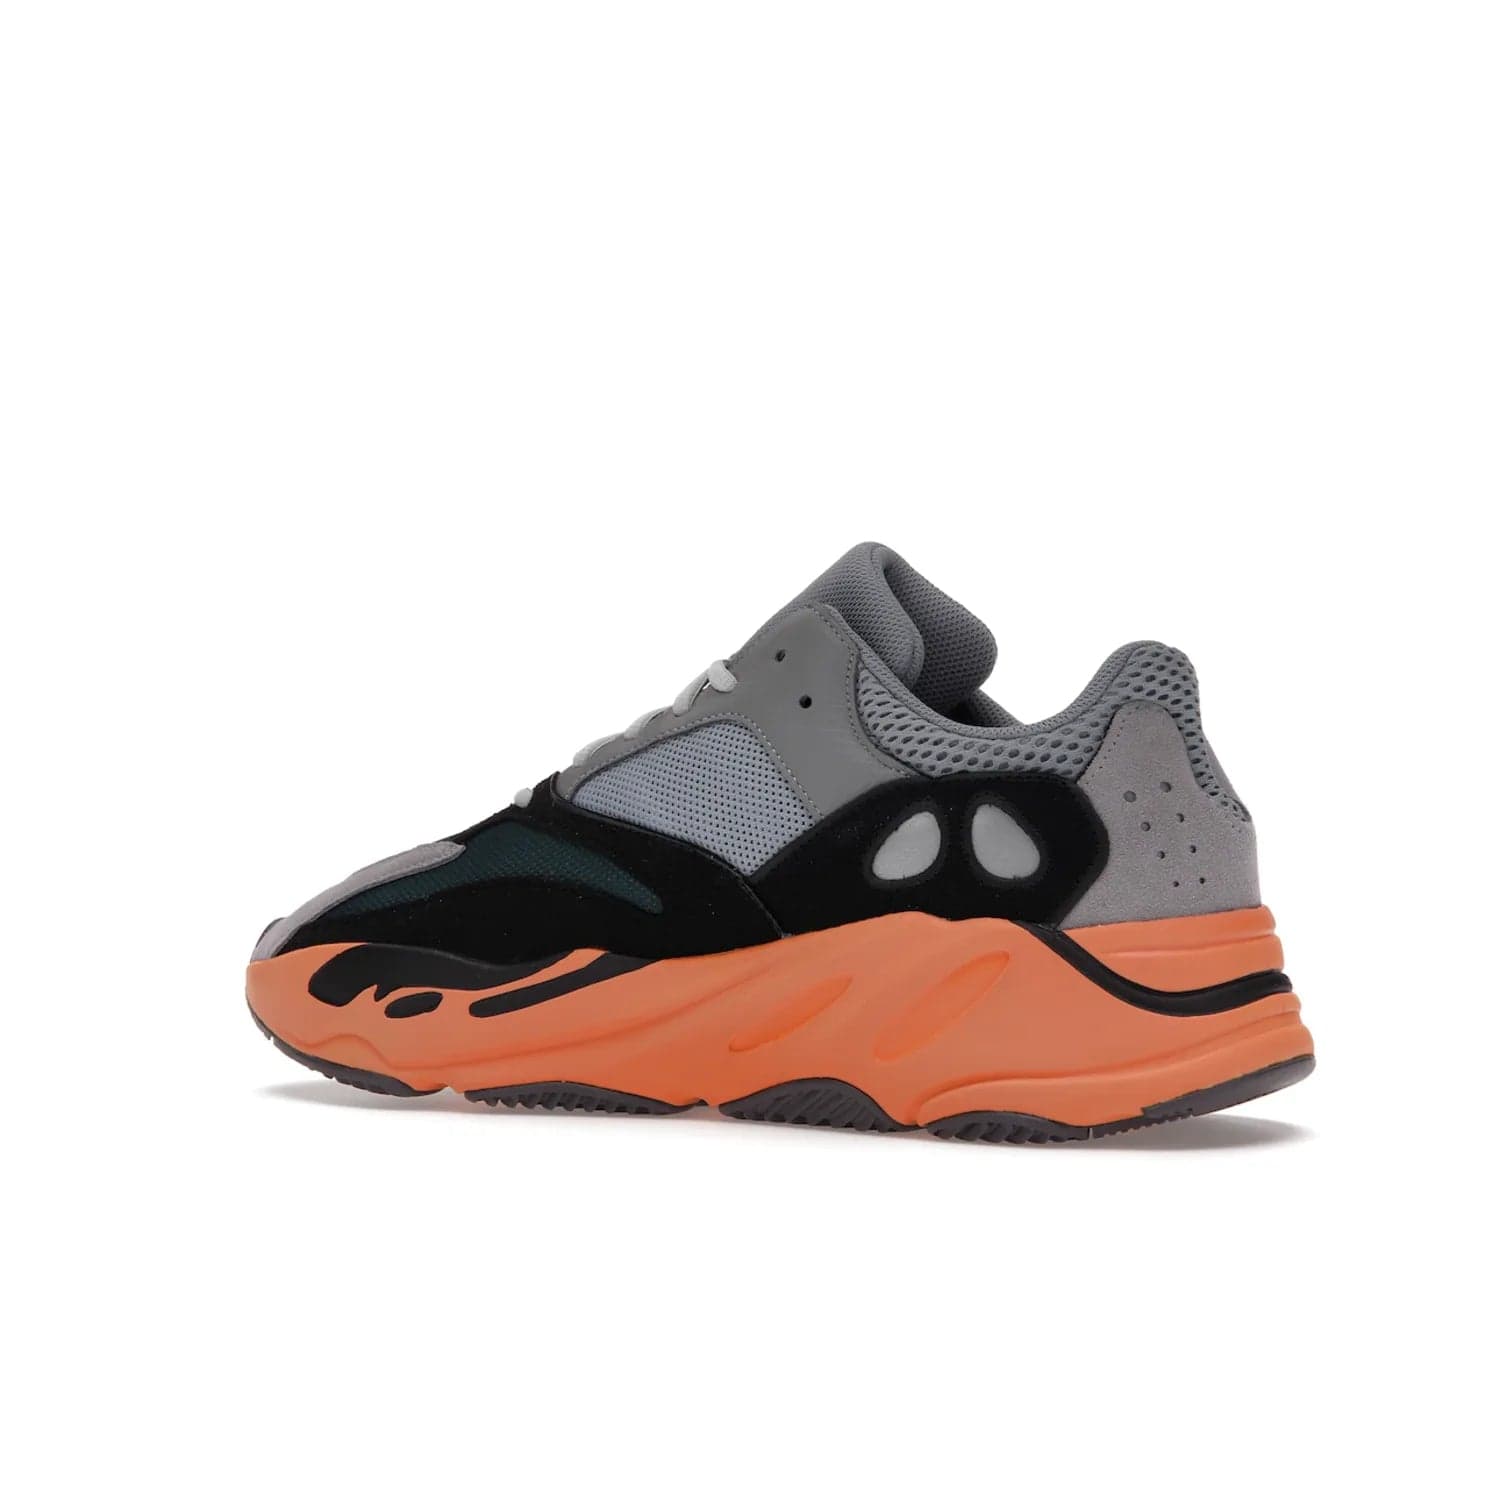 adidas Yeezy Boost 700 Wash Orange - Image 22 - Only at www.BallersClubKickz.com - Introducing the adidas Yeezy Boost 700 Wash Orange. Unique grey leather, suede, mesh upper and teal panels with a chunky Wash Orange Boost midsole. Release October 2021, make a statement today!